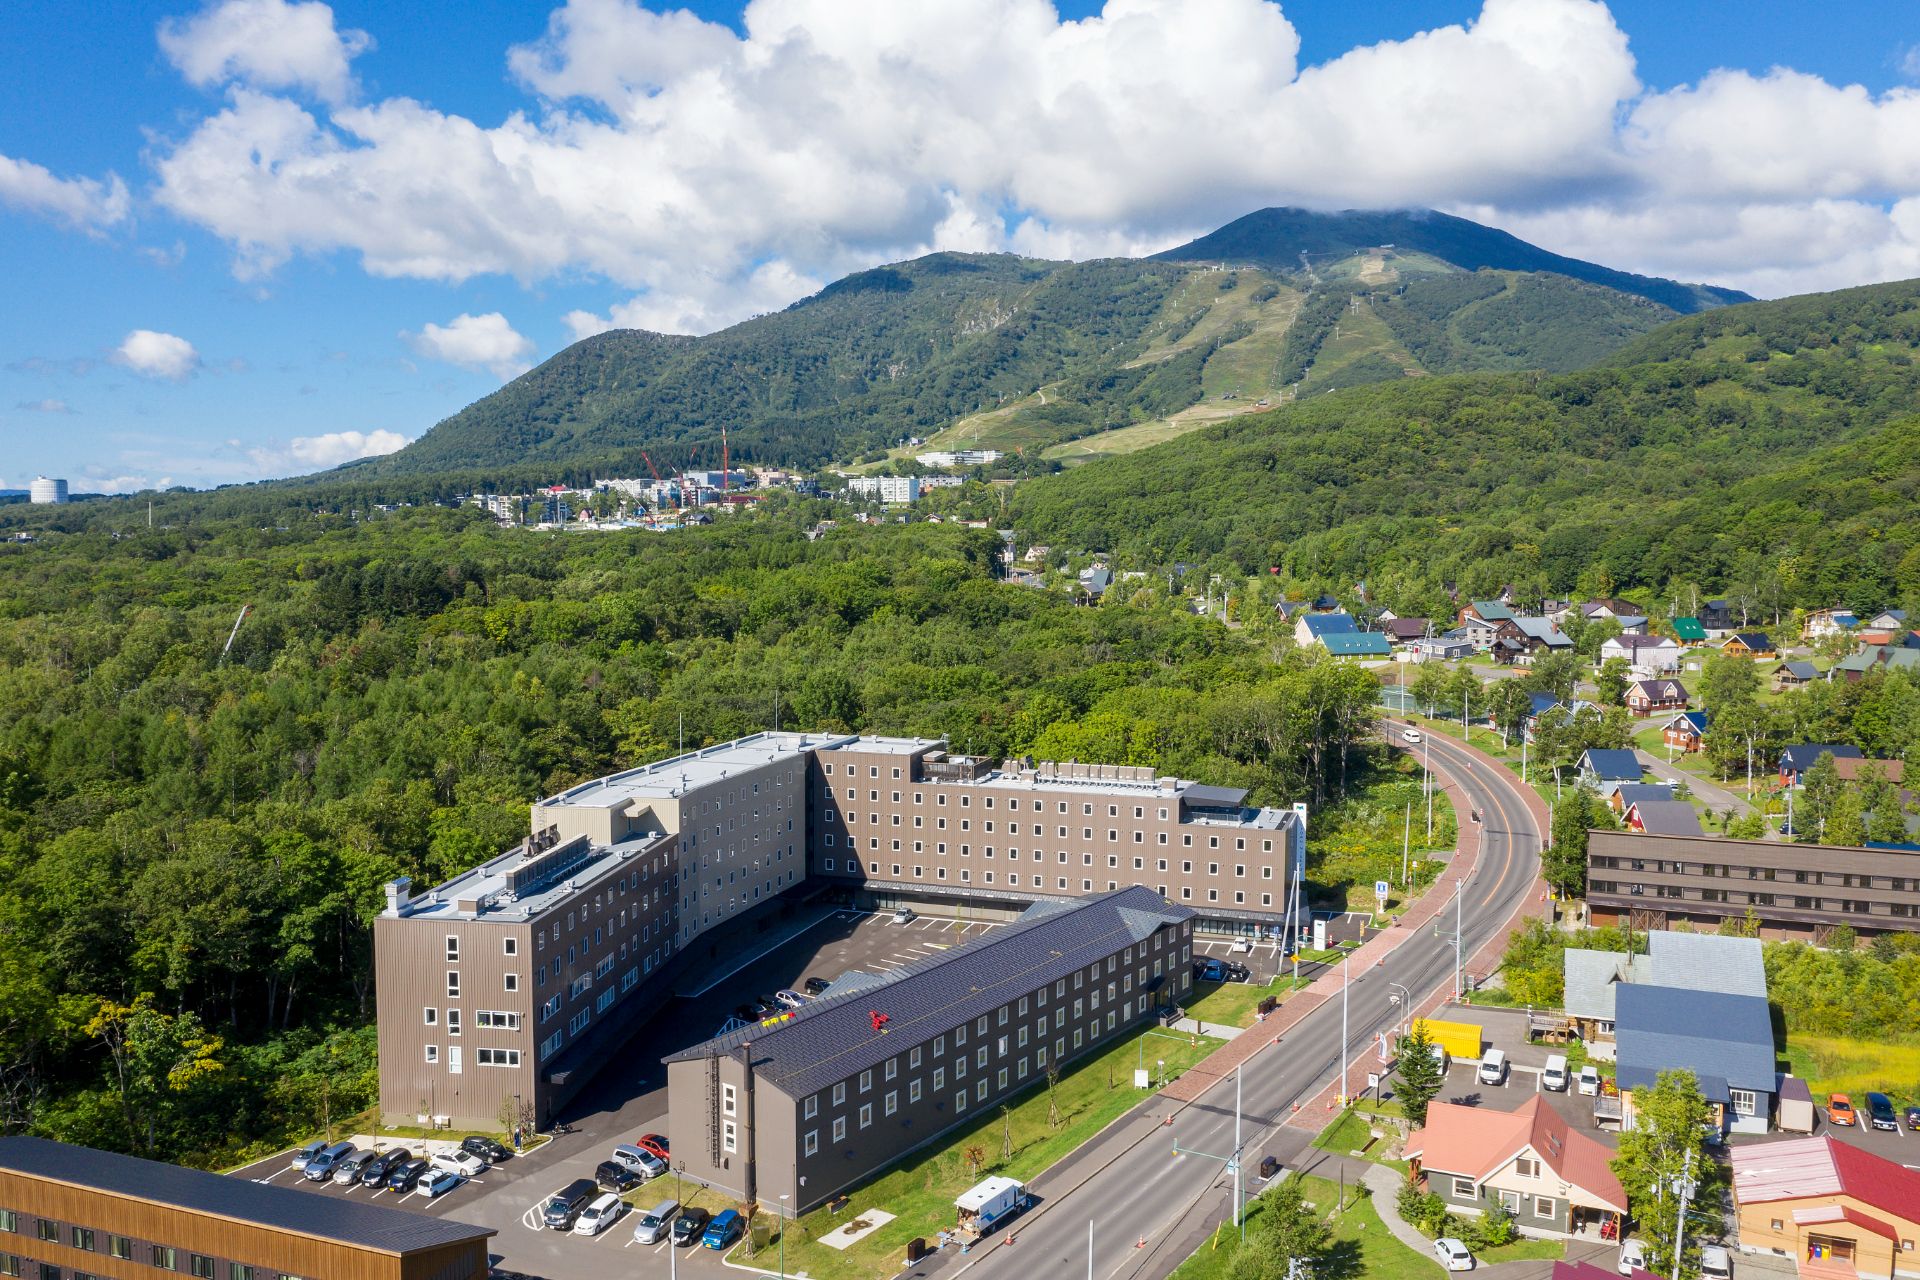 This is the landscape image for Midtown Niseko.